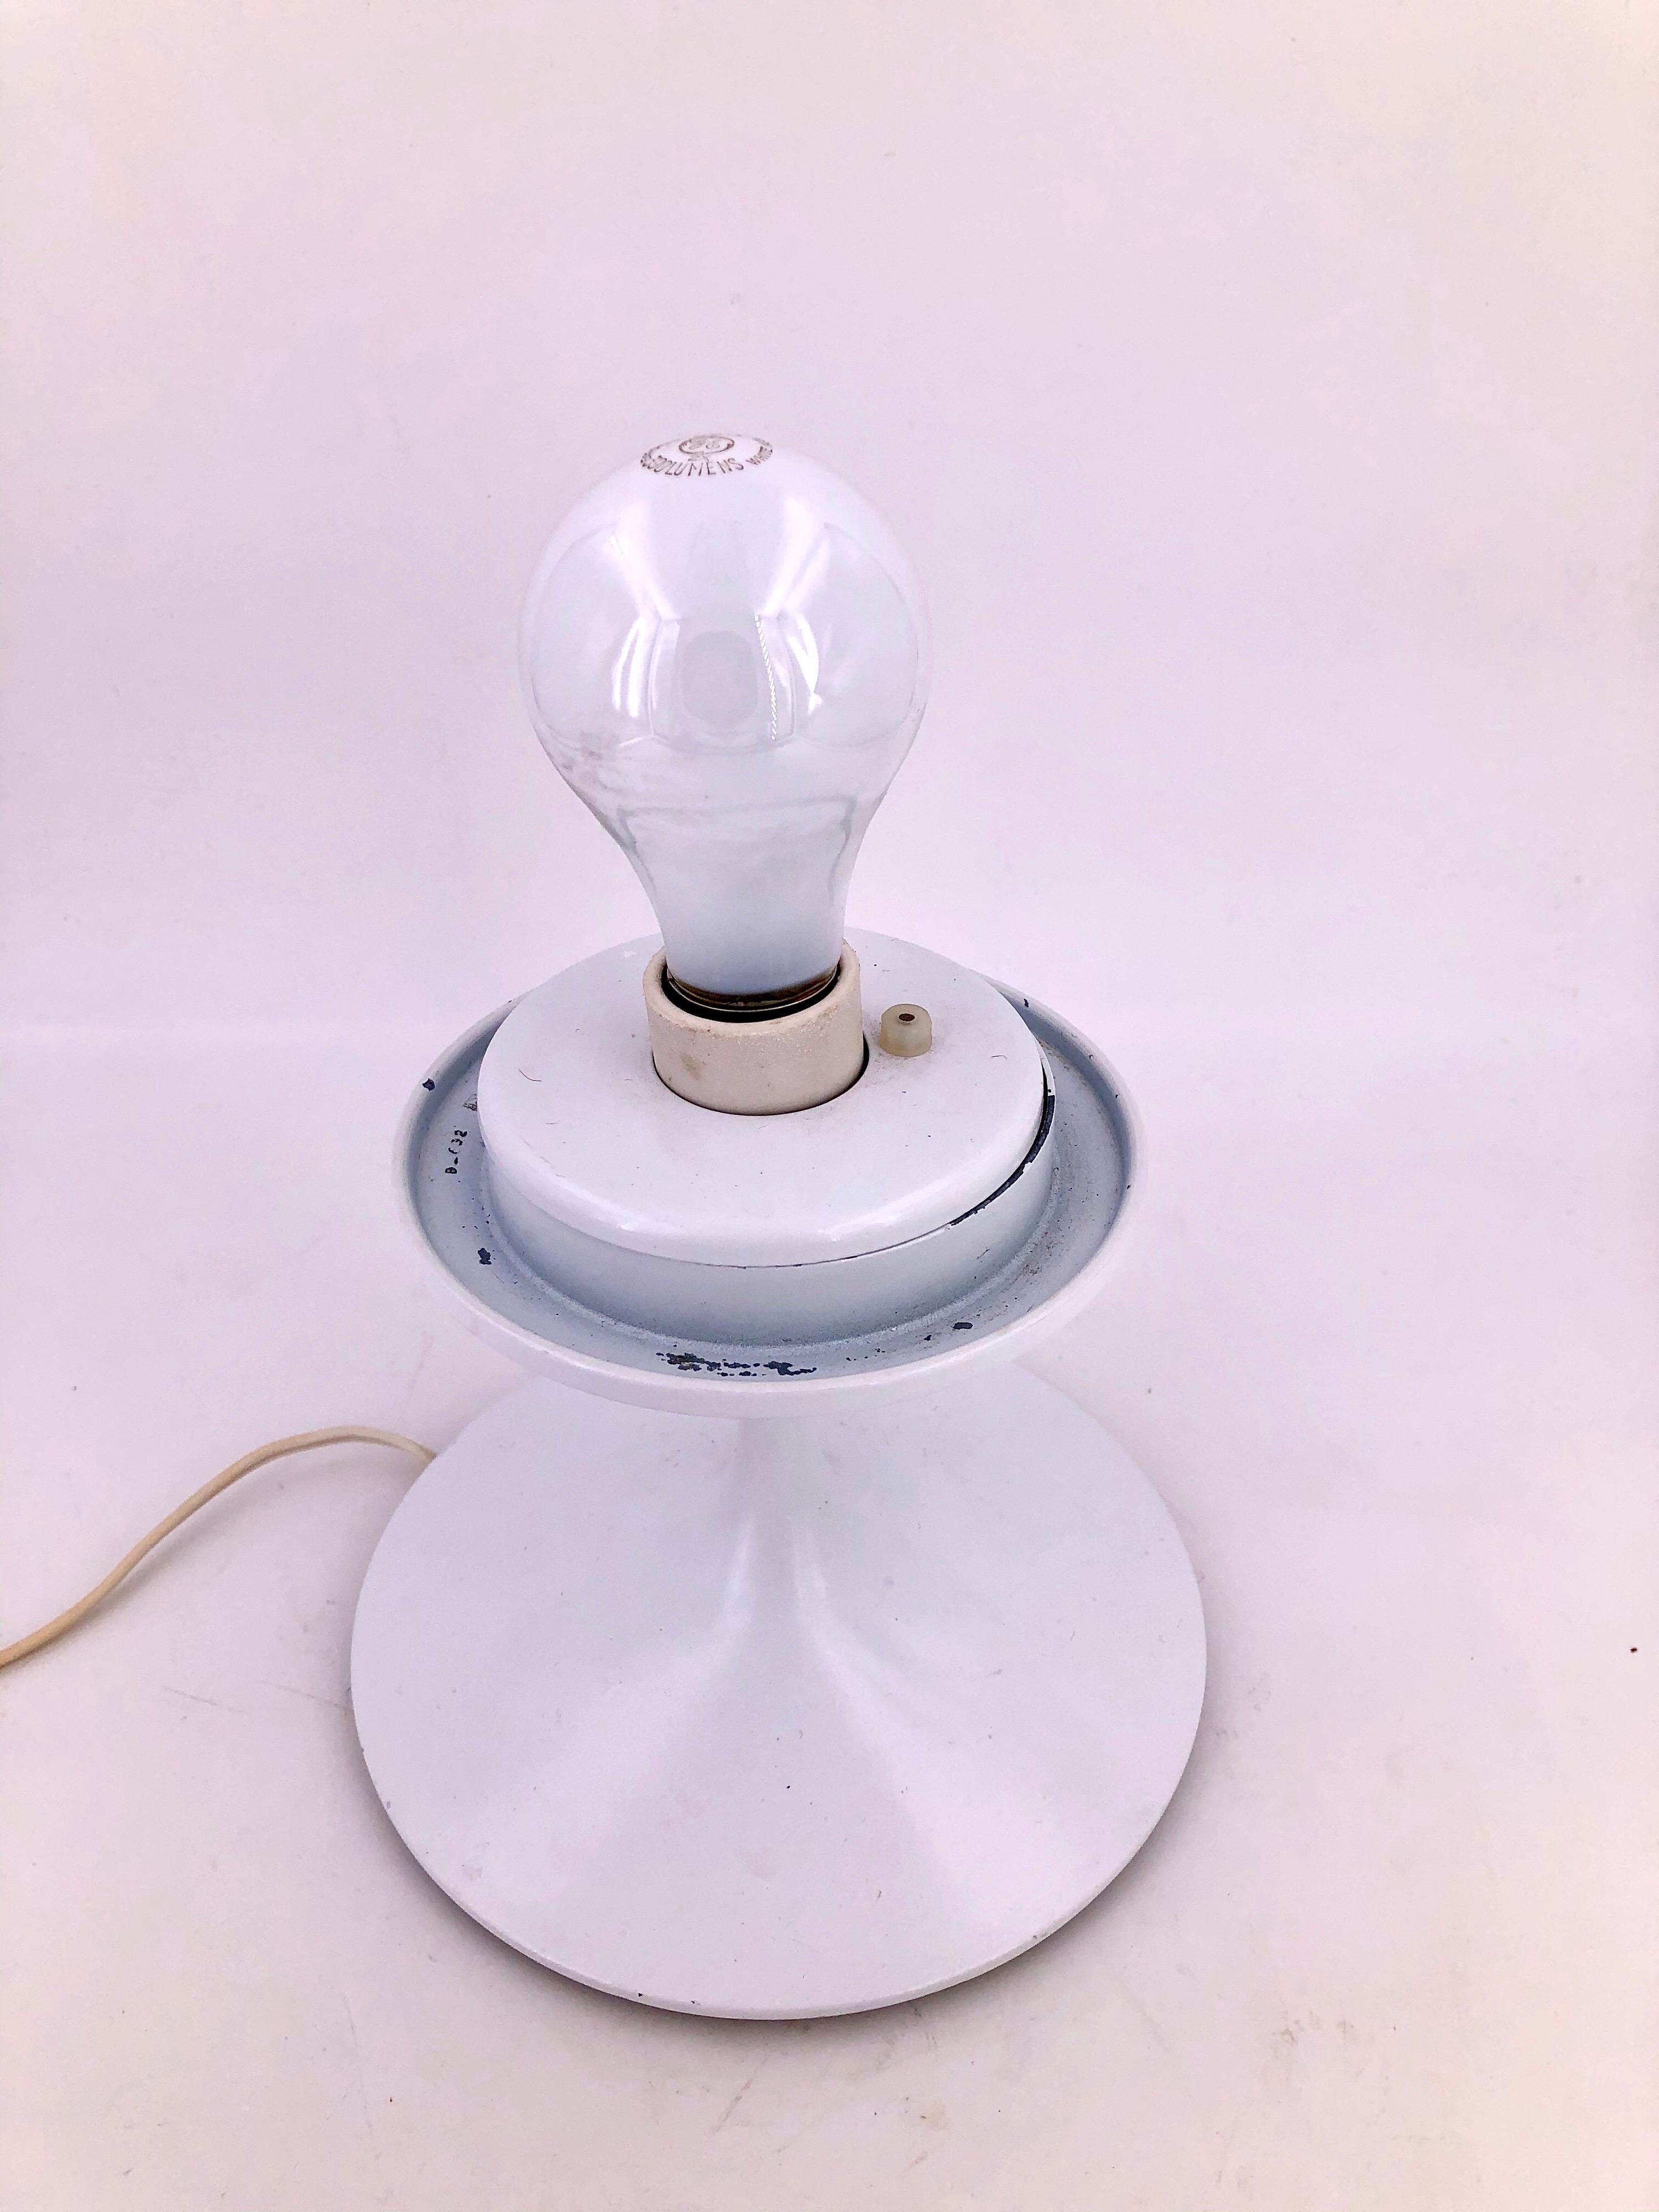 20th Century 1960s American Modern Table Lamp Designed by Bill Curry for Design Line Stemlite